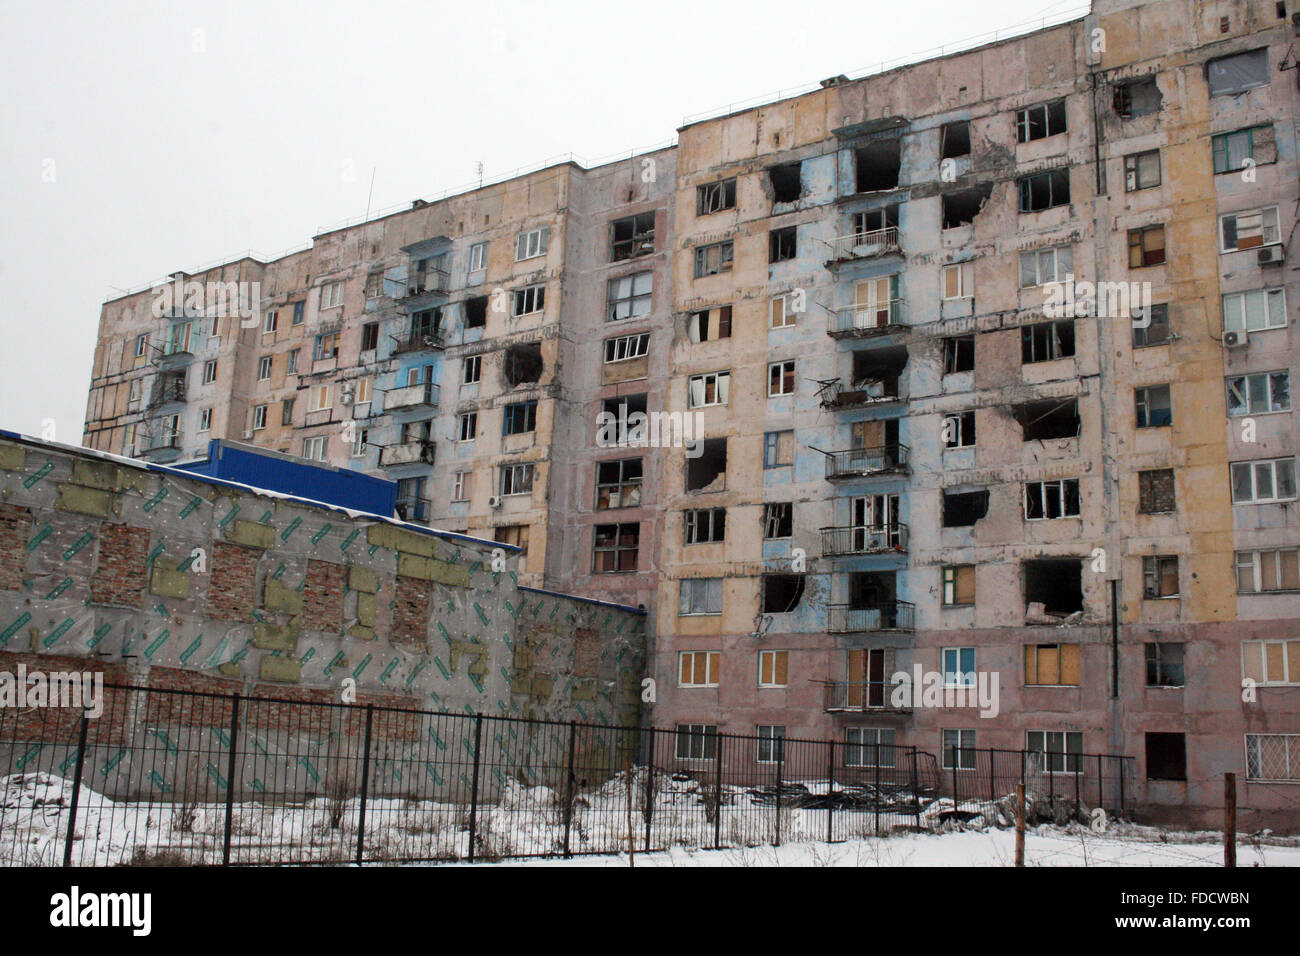 A destroyed apartment building in Avdiivka, Ukraine 28 January 206. The small town is located at the front of the separatists and reconstruction is progressing slowly. Photo: Friedemann Kohler/dpa Stock Photo